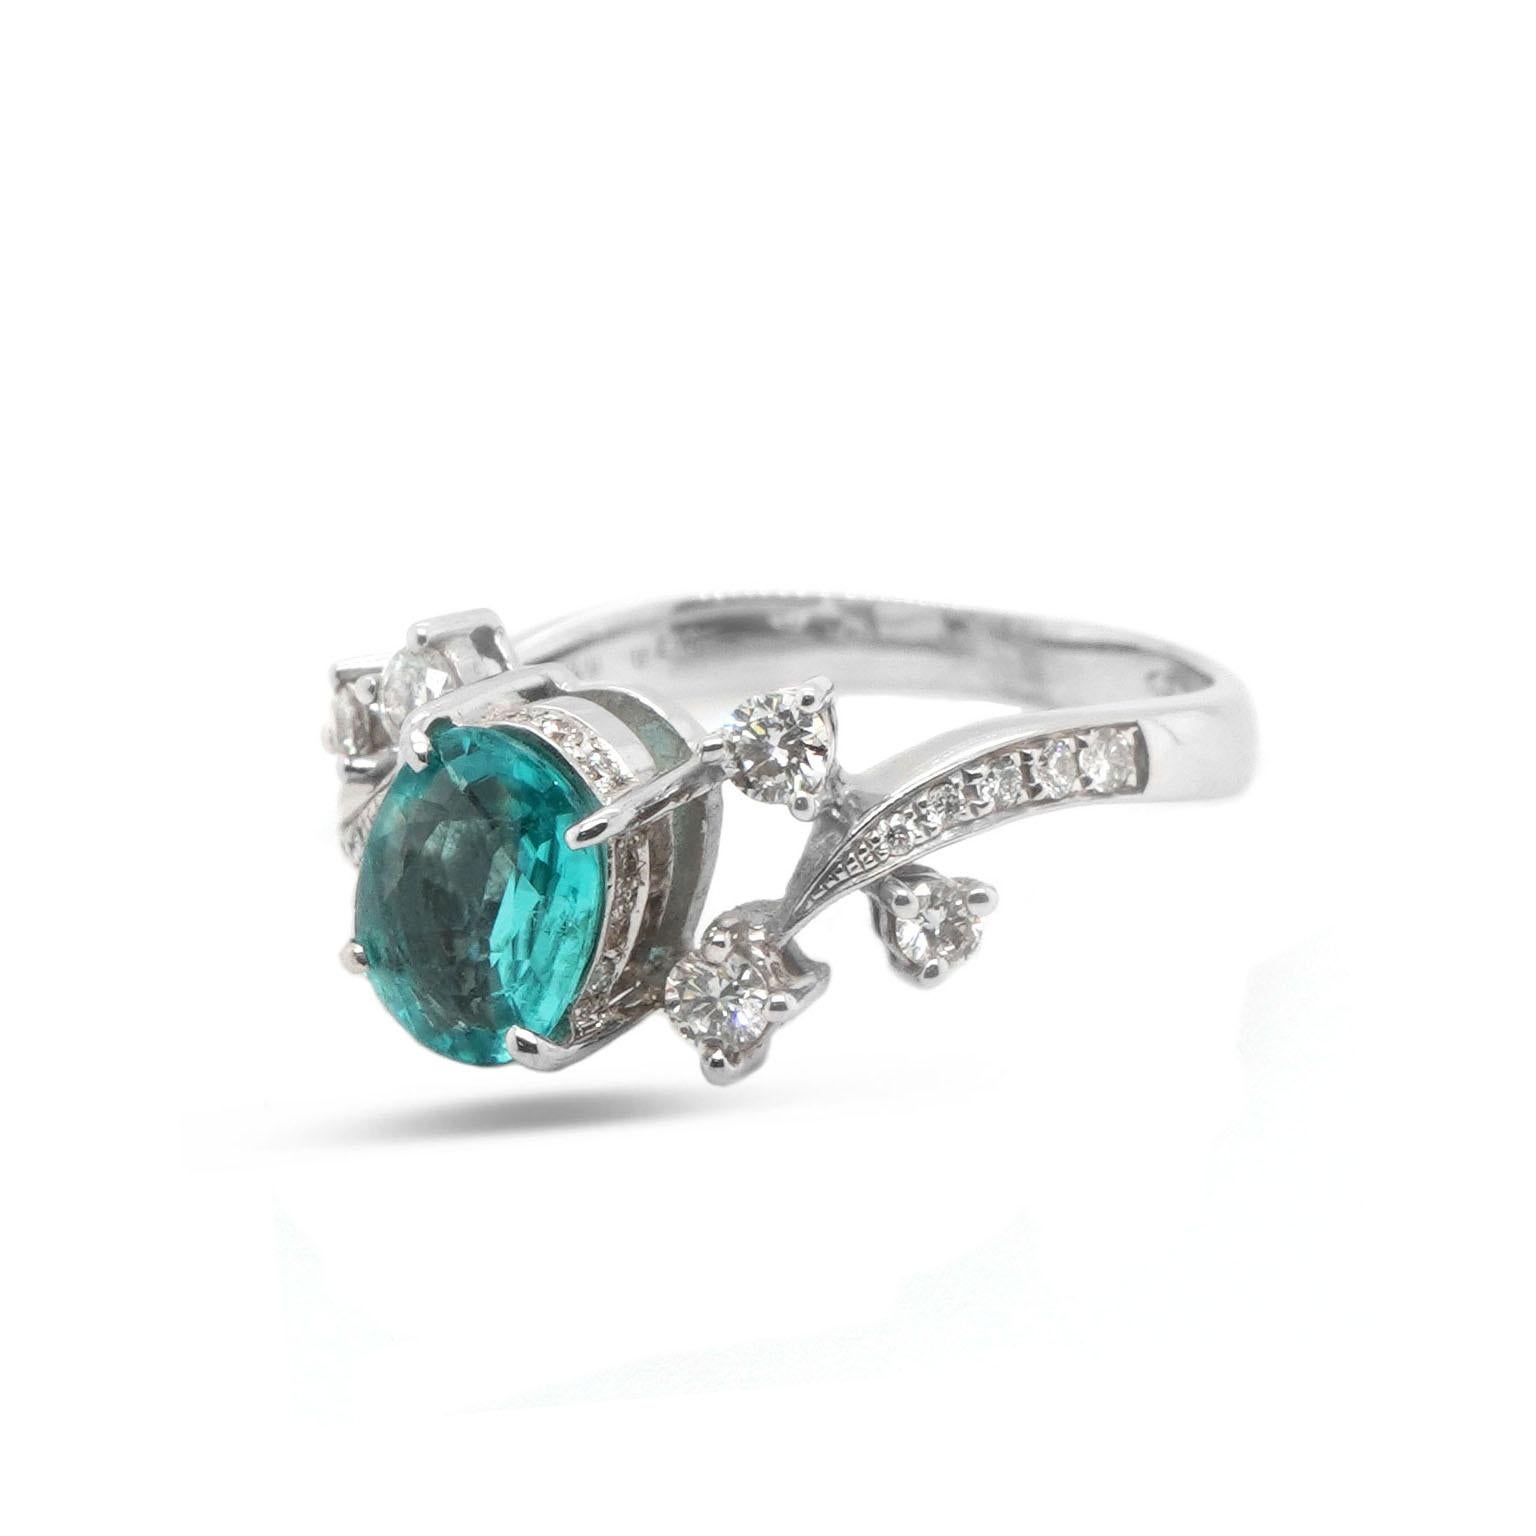 A beautiful neon color Brazilian Paraiba is set along with few pieces of white brilliant round diamond. “Paraíba” tourmaline is by far the most valuable, and perhaps the most popular, of all tourmaline gem varieties. The details of the ring are